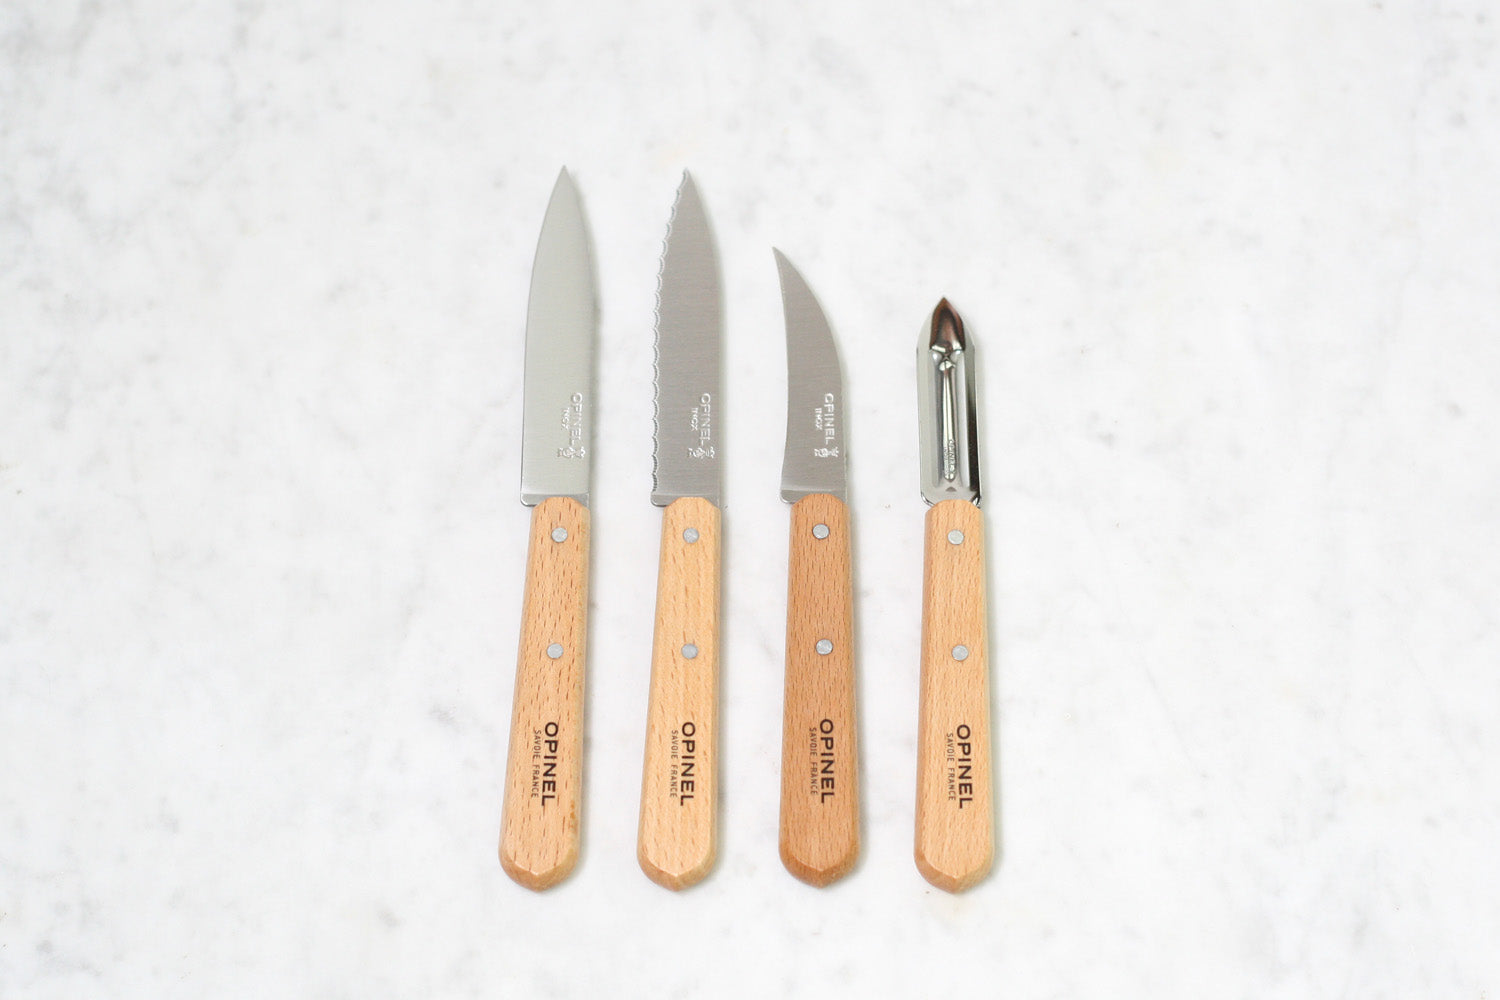 Essential Small Kitchen Knife Set - OPINEL USA